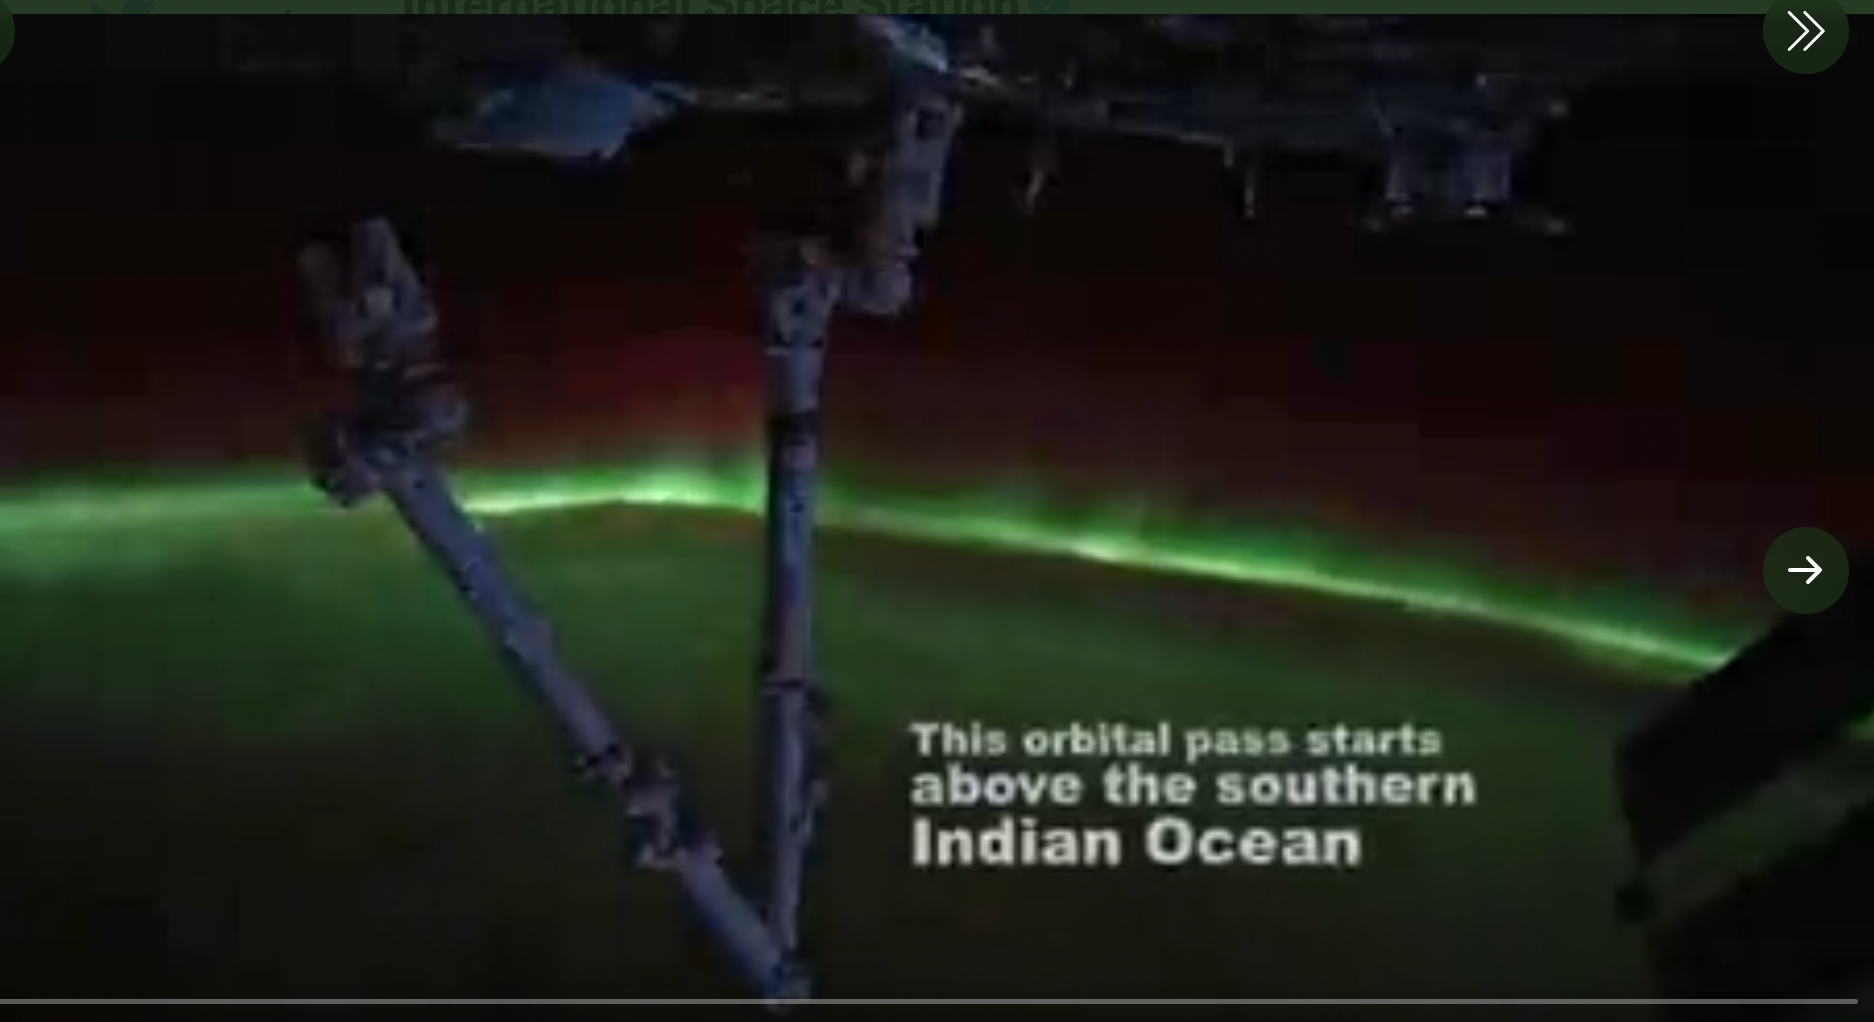 The Southern Lights above the Indian Ocean as seen from the International Space Station